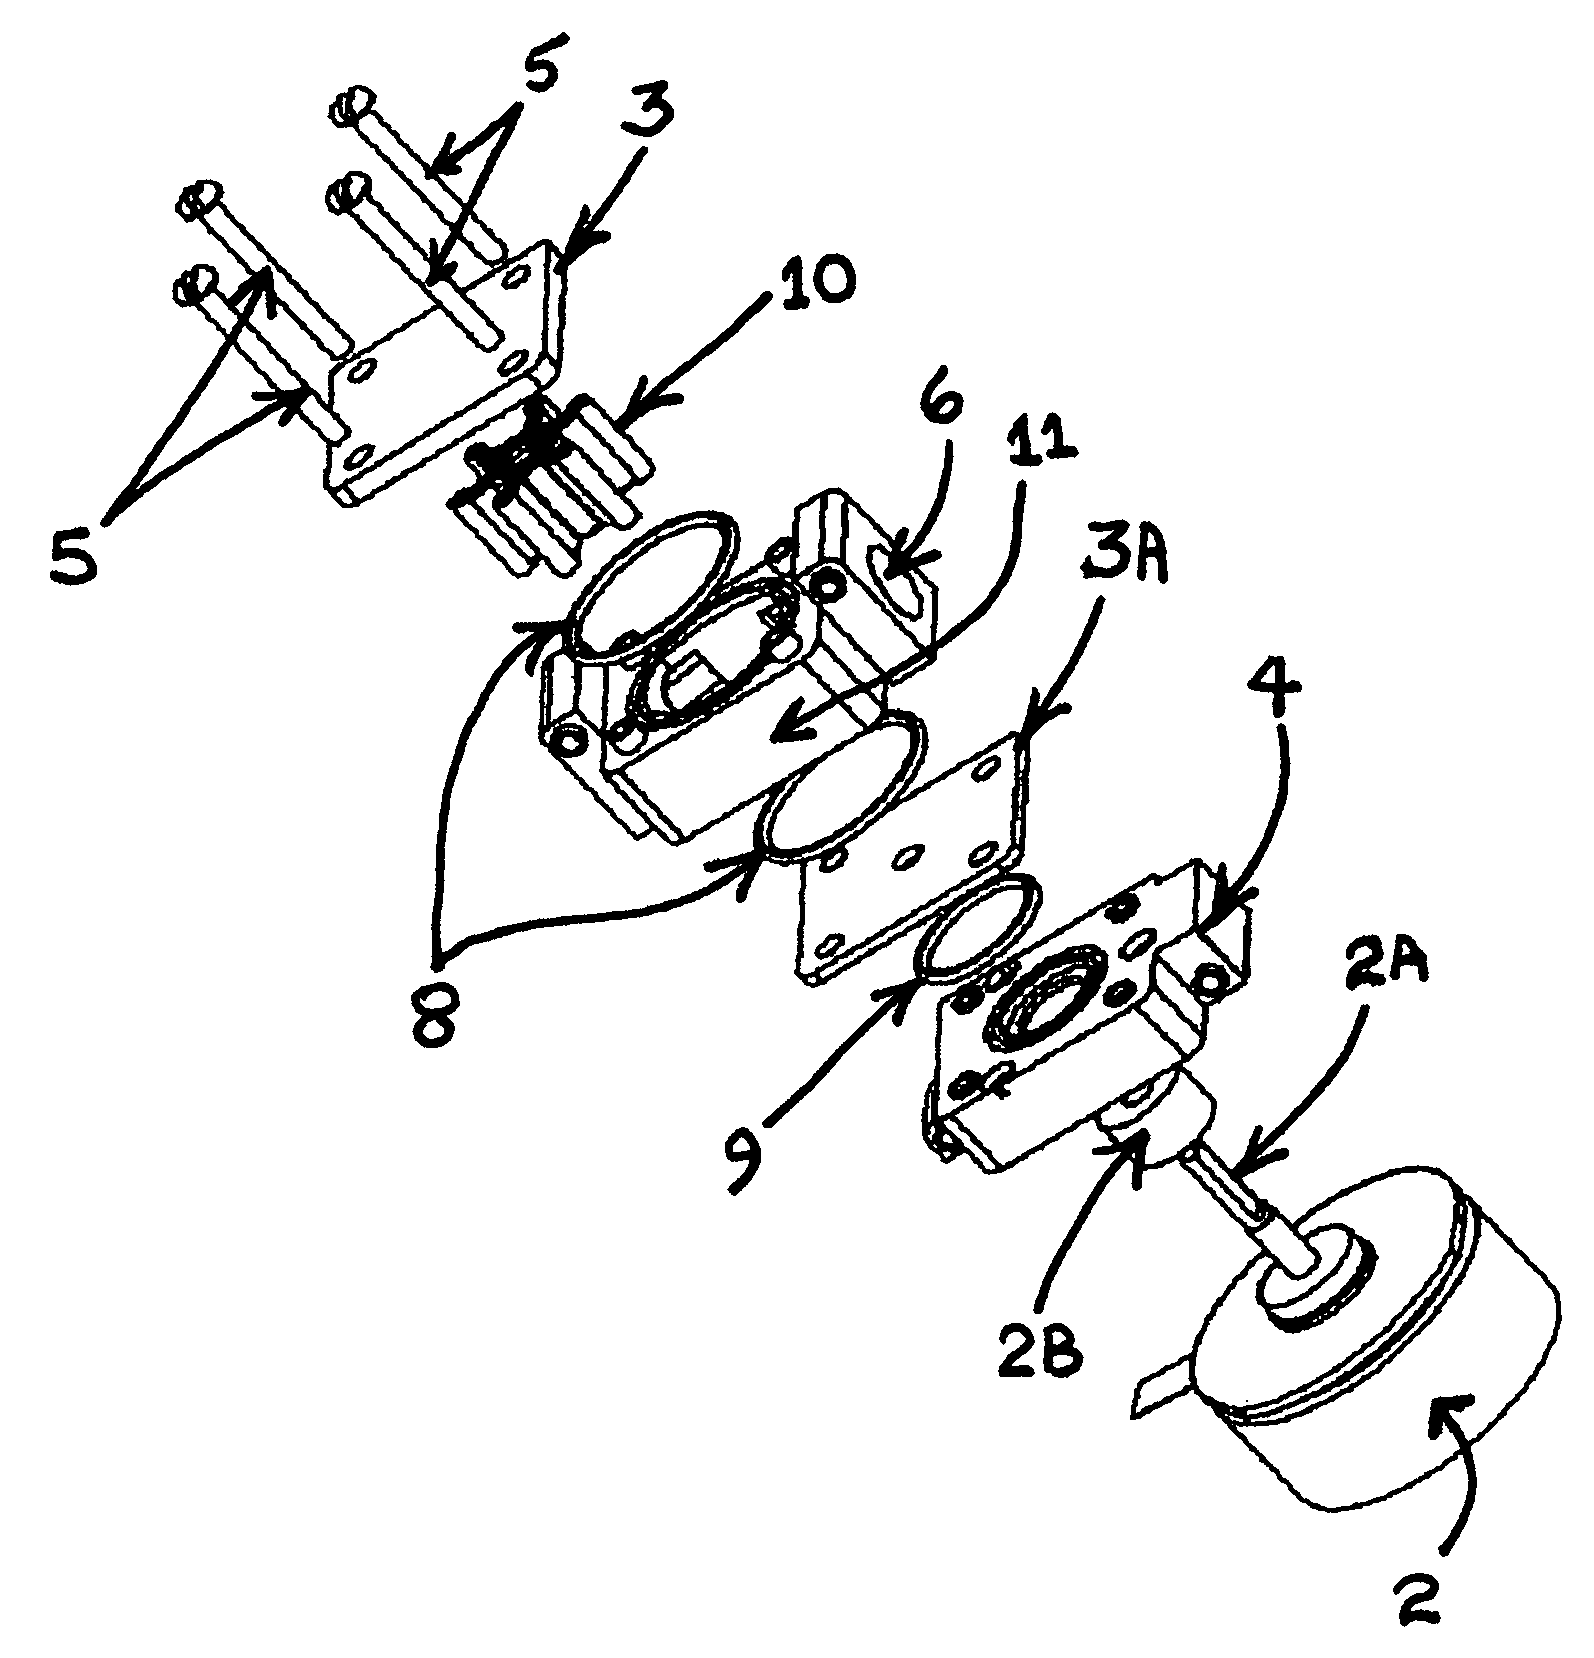 Dry running flexible impeller pump and method of manufacture